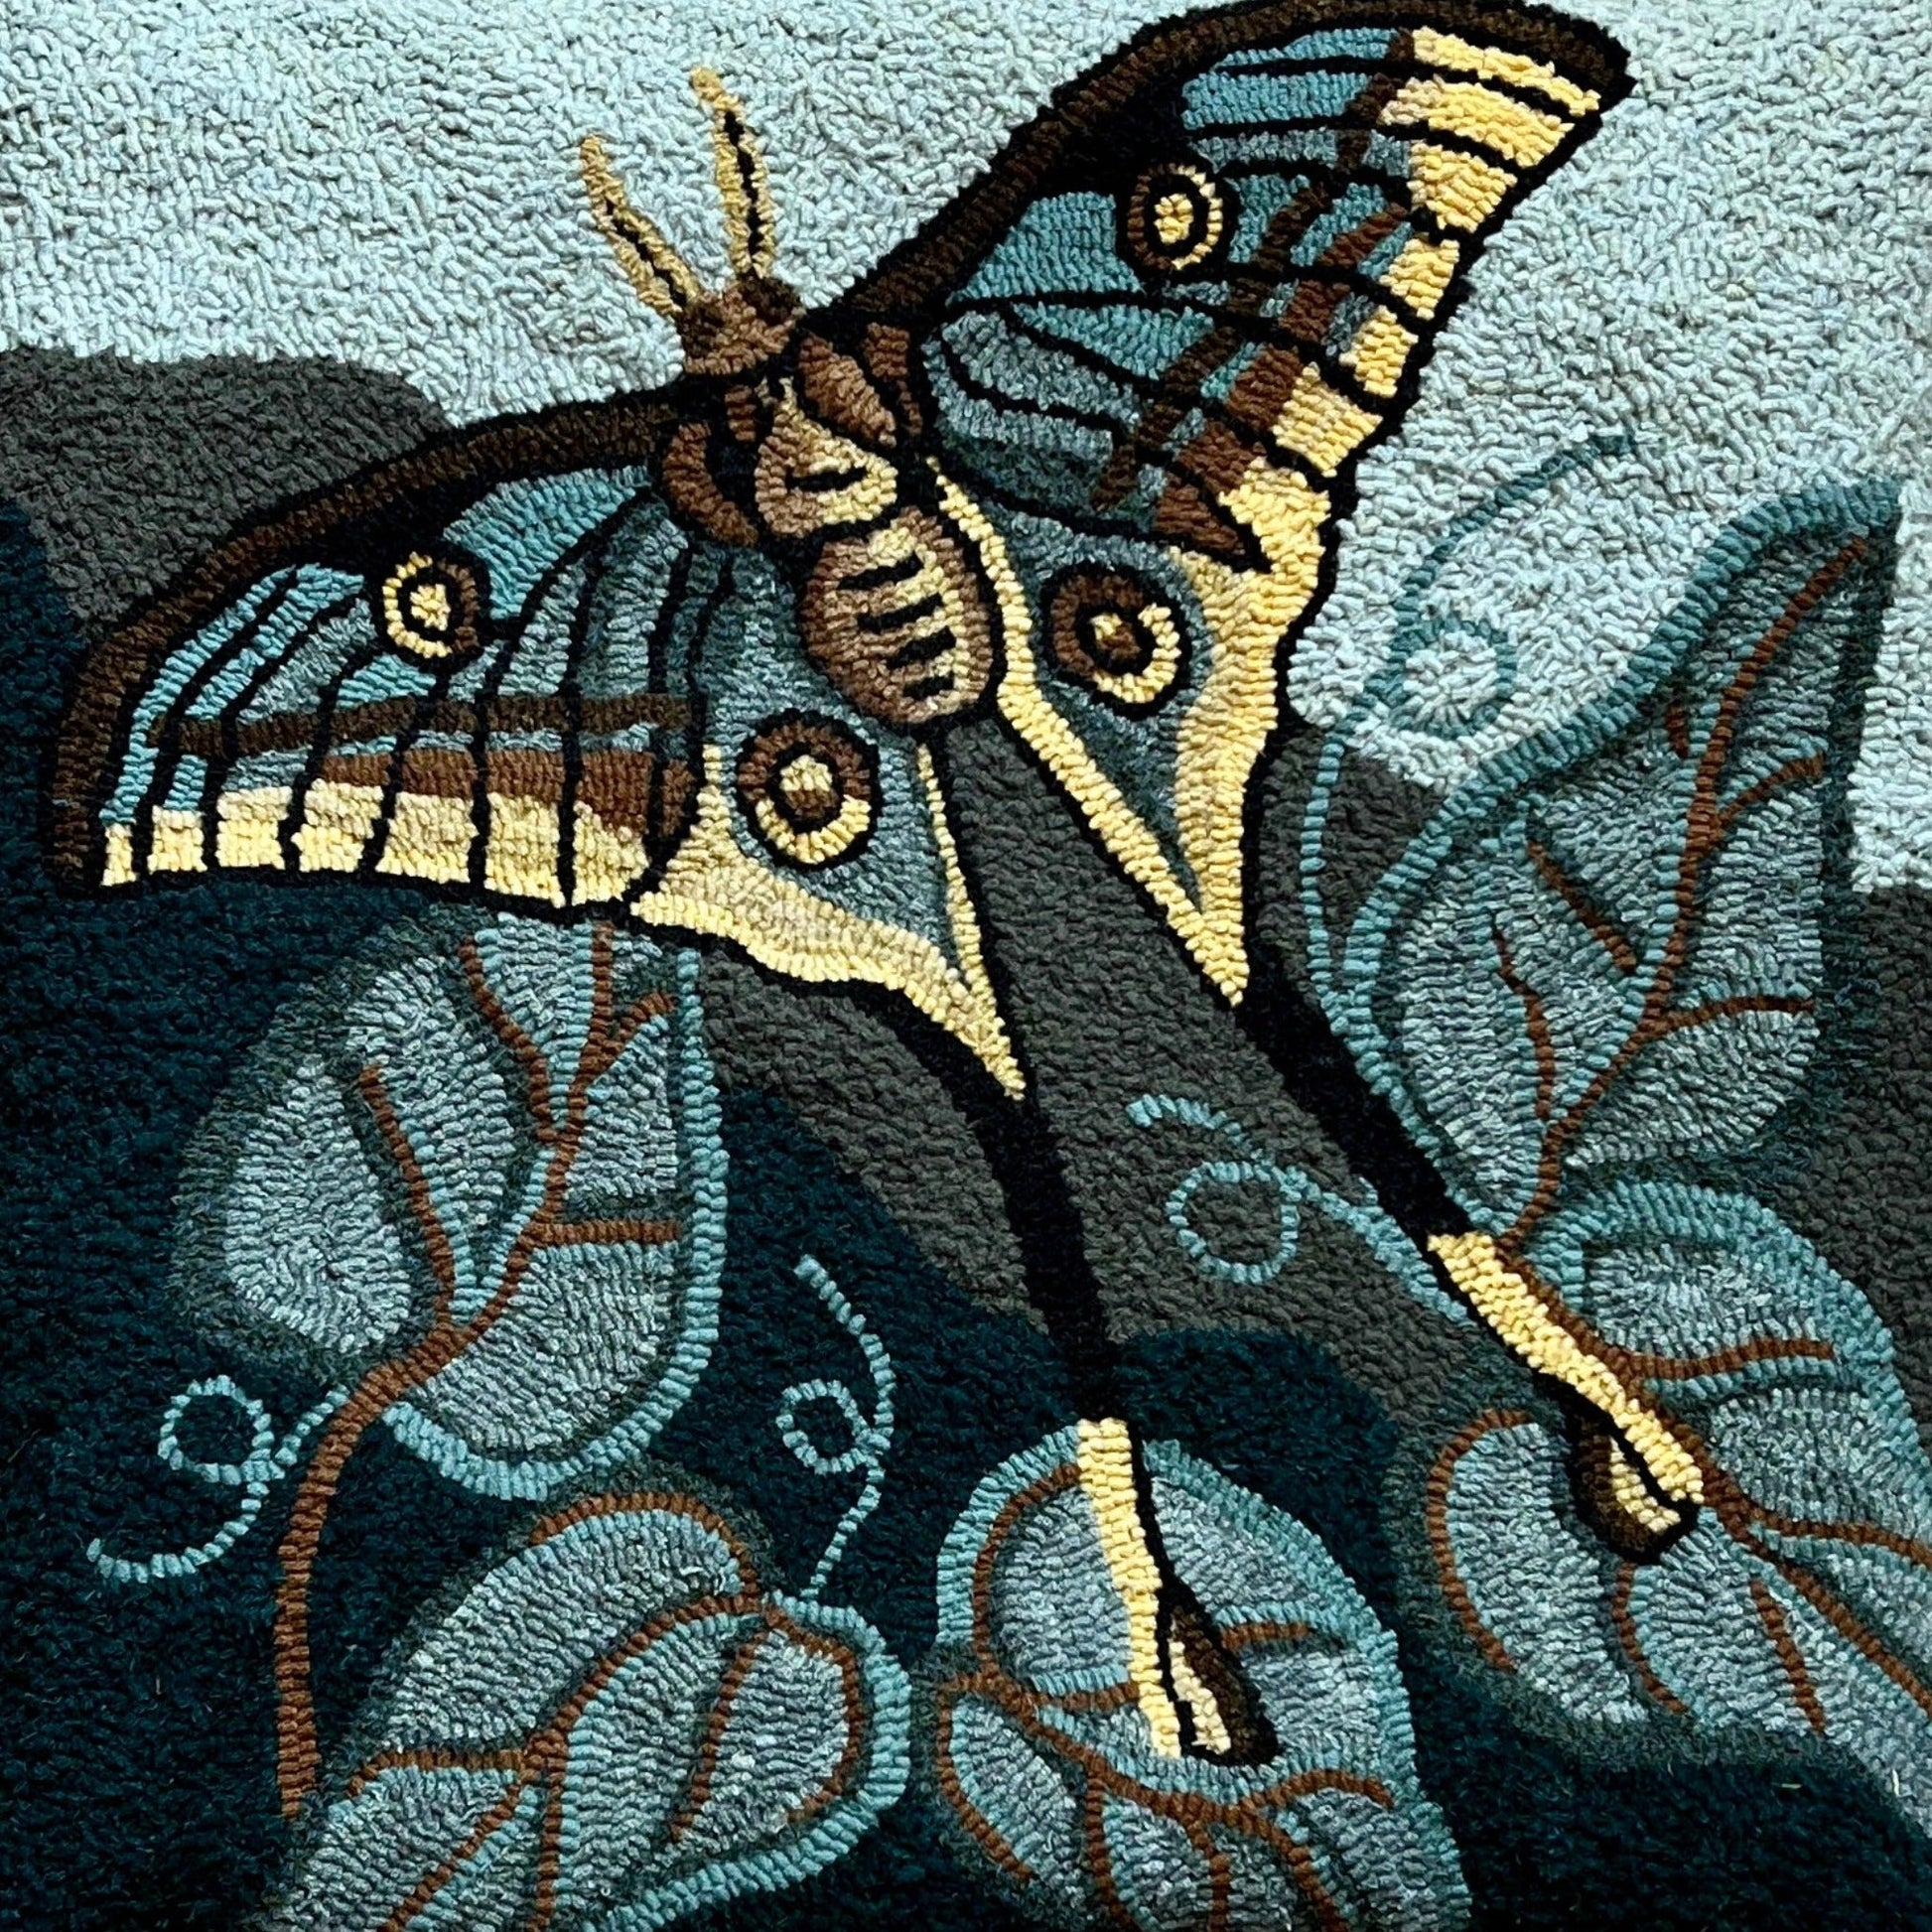  Spanish Moon Moth-PDF Digital Download Rug Hooking Pattern by Orphaned Wool, Copyright 2024 Kelly Kanyok. Enjoy creating this wonderful Spanish Moon Moth pattern designed for enlargement. Create the perfect size design for your home.